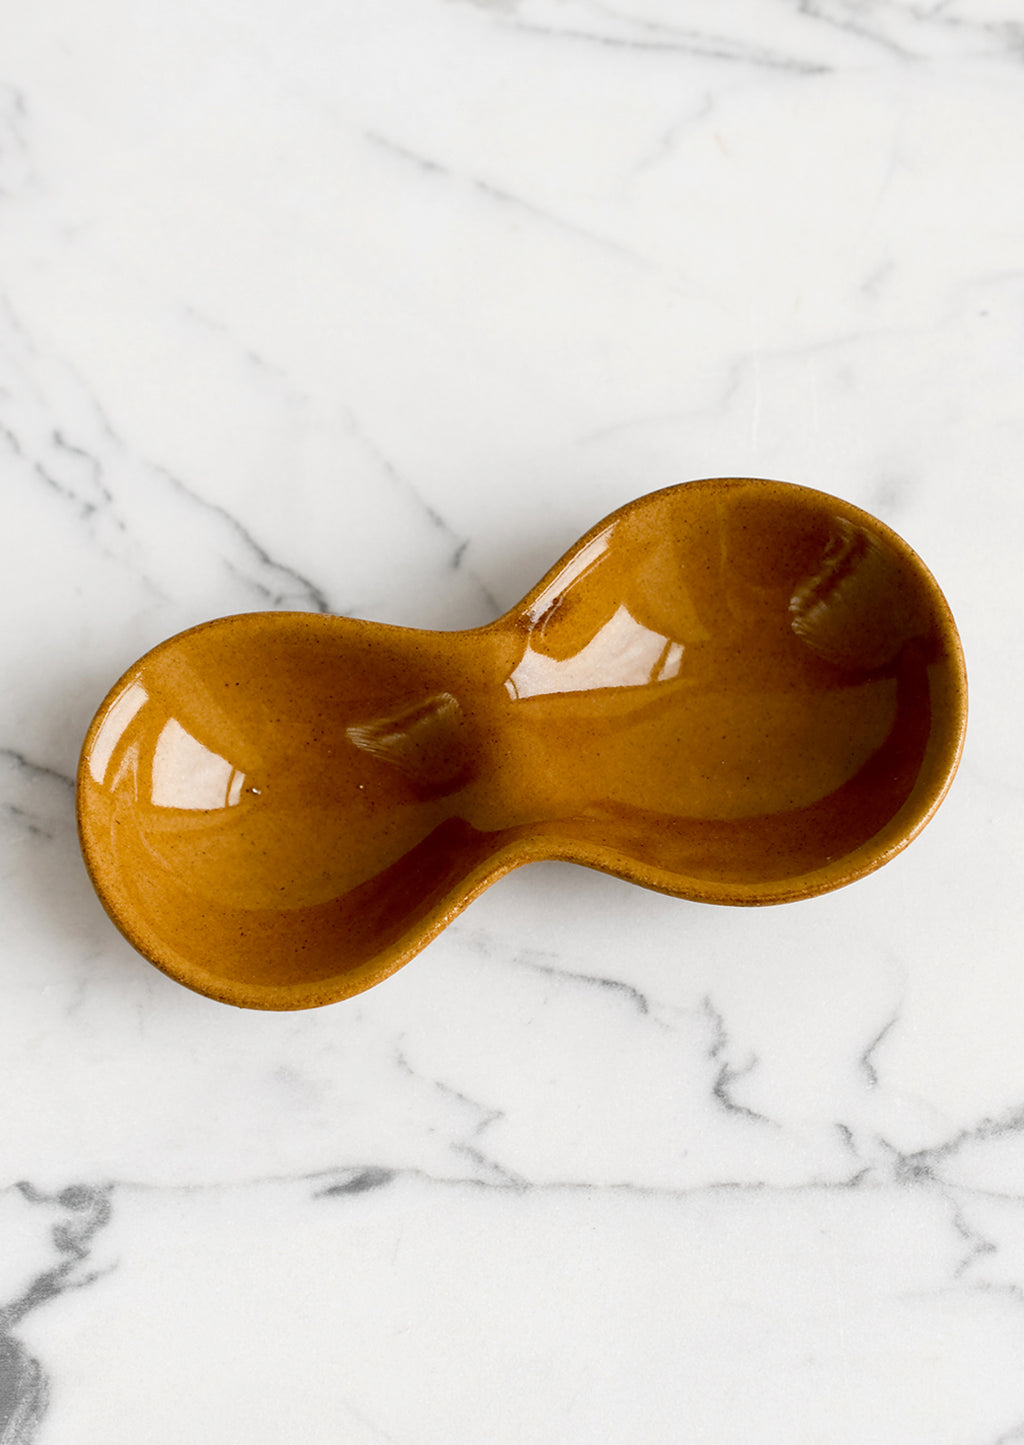 1: A glossy caramel colored ceramic dish with two wells.